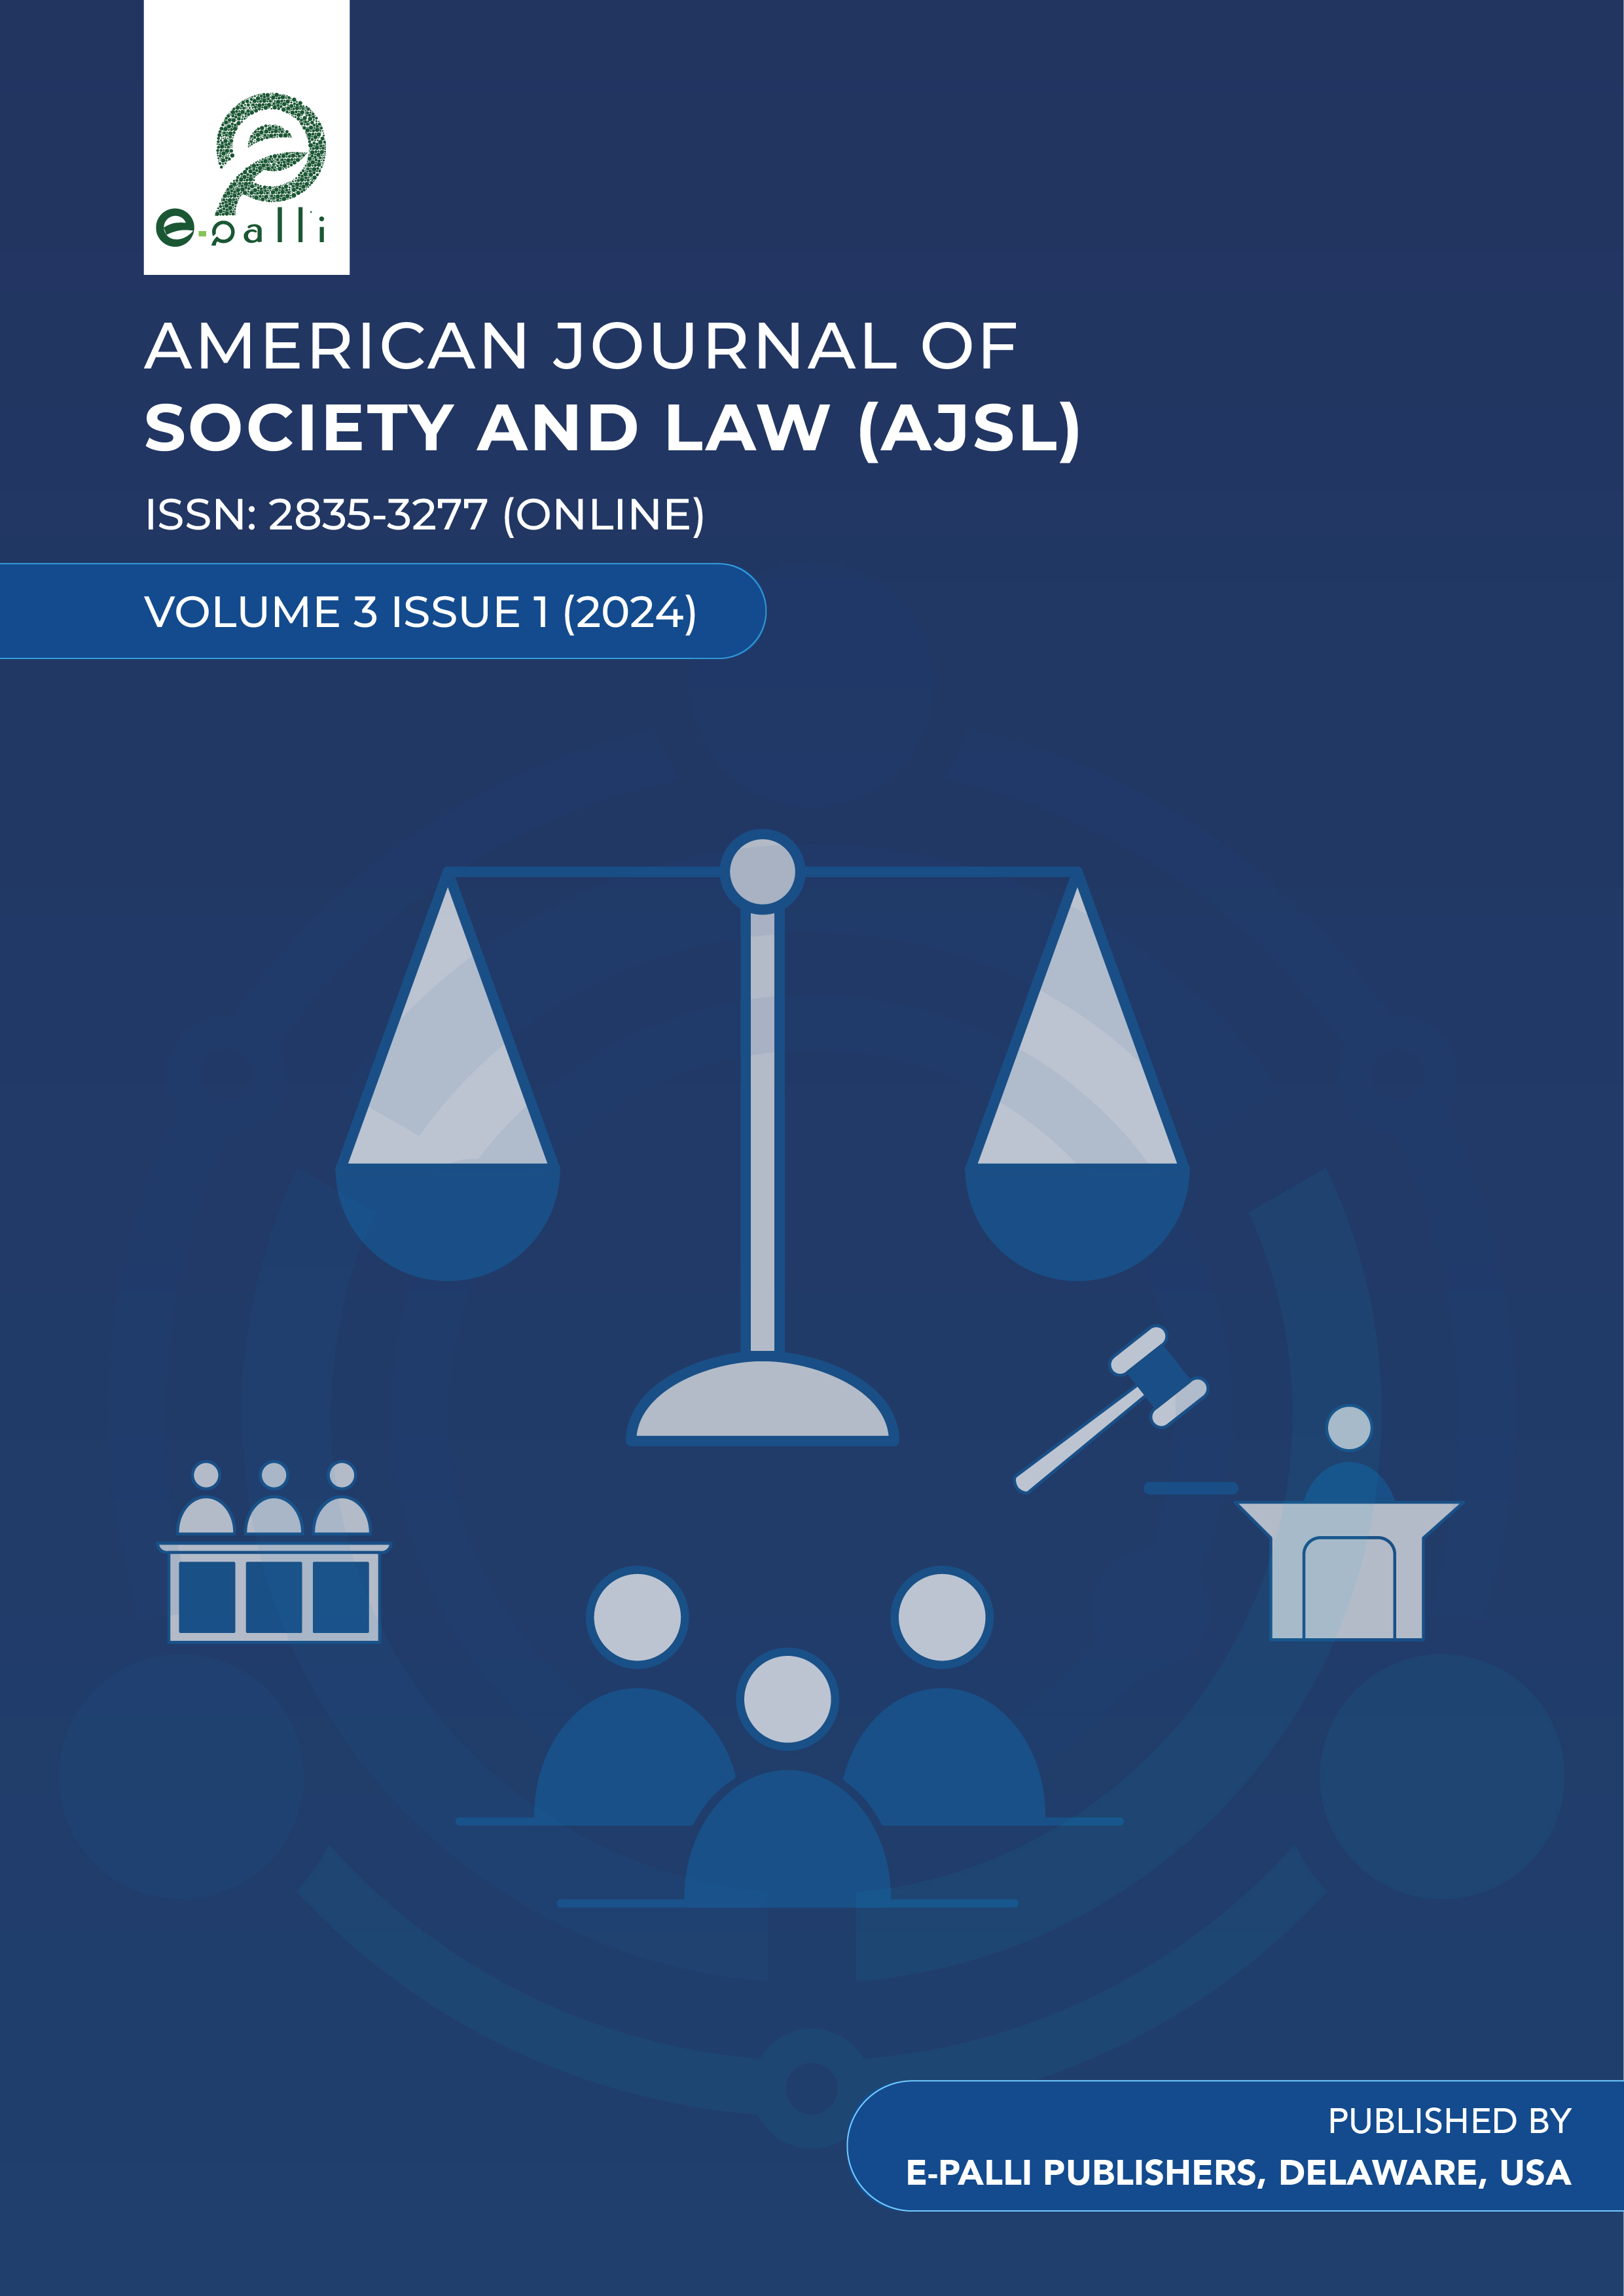 					View Vol. 3 No. 1 (2024): American Journal of Society and Law
				